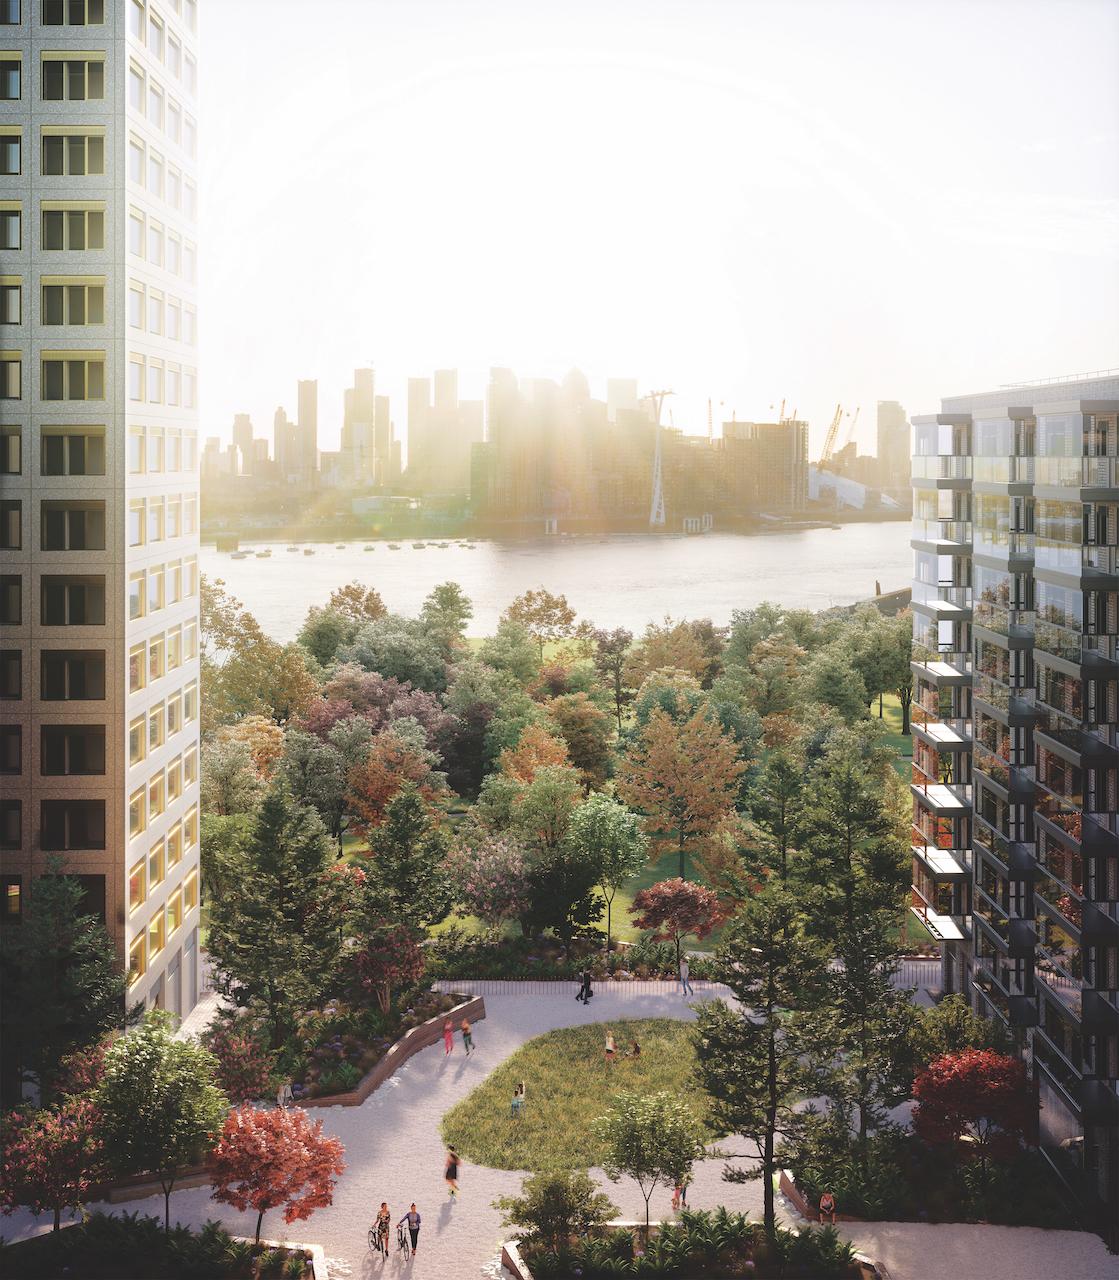 Property Investment: Riverscape in London